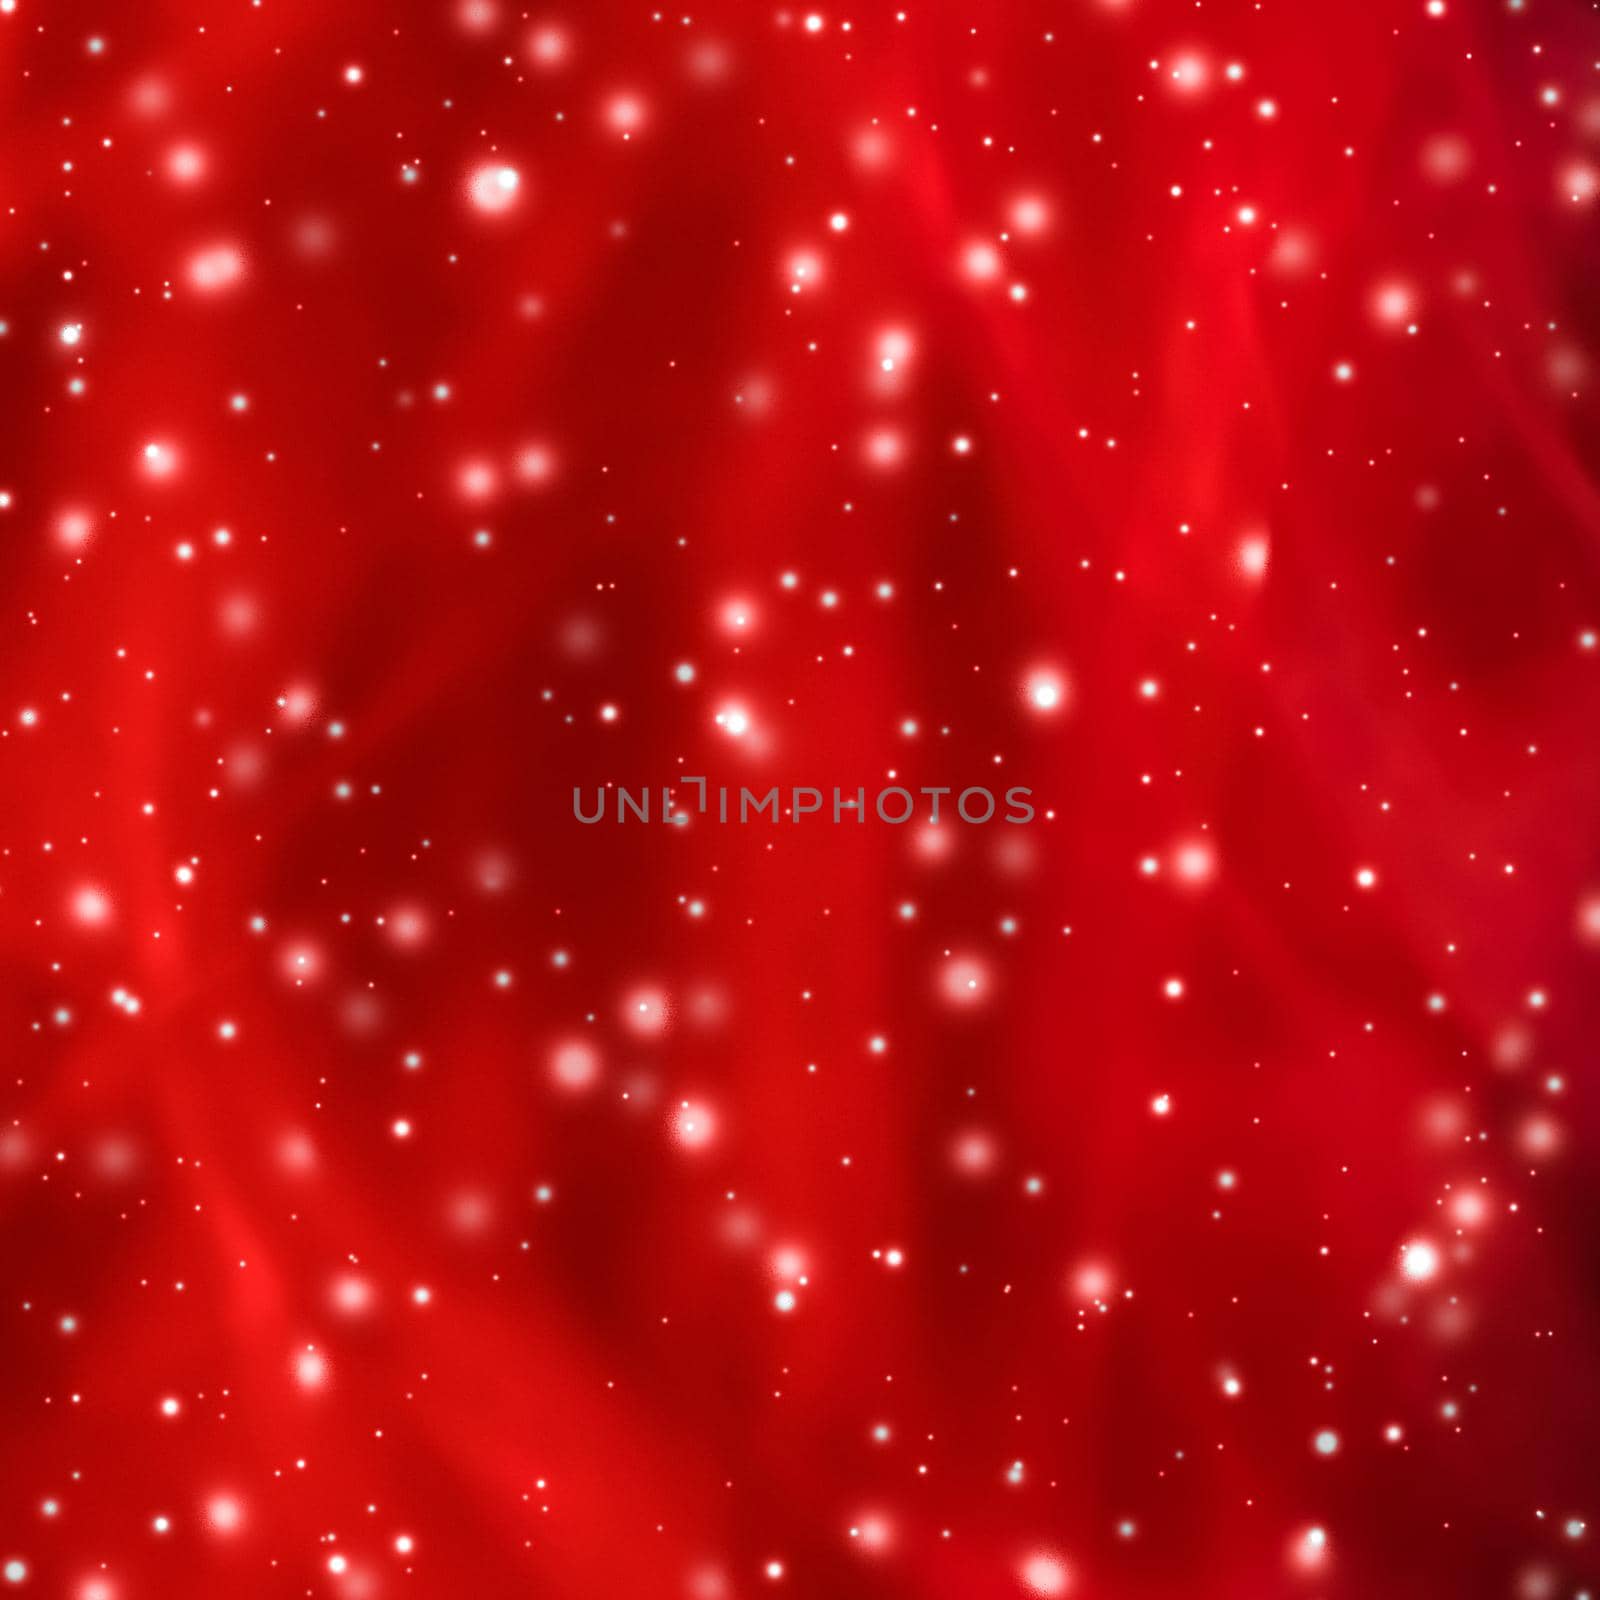 Christmas, New Years and Valentines Day red abstract background, holidays card design, shiny snow glitter as winter season sale backdrop for luxury beauty brand by Anneleven